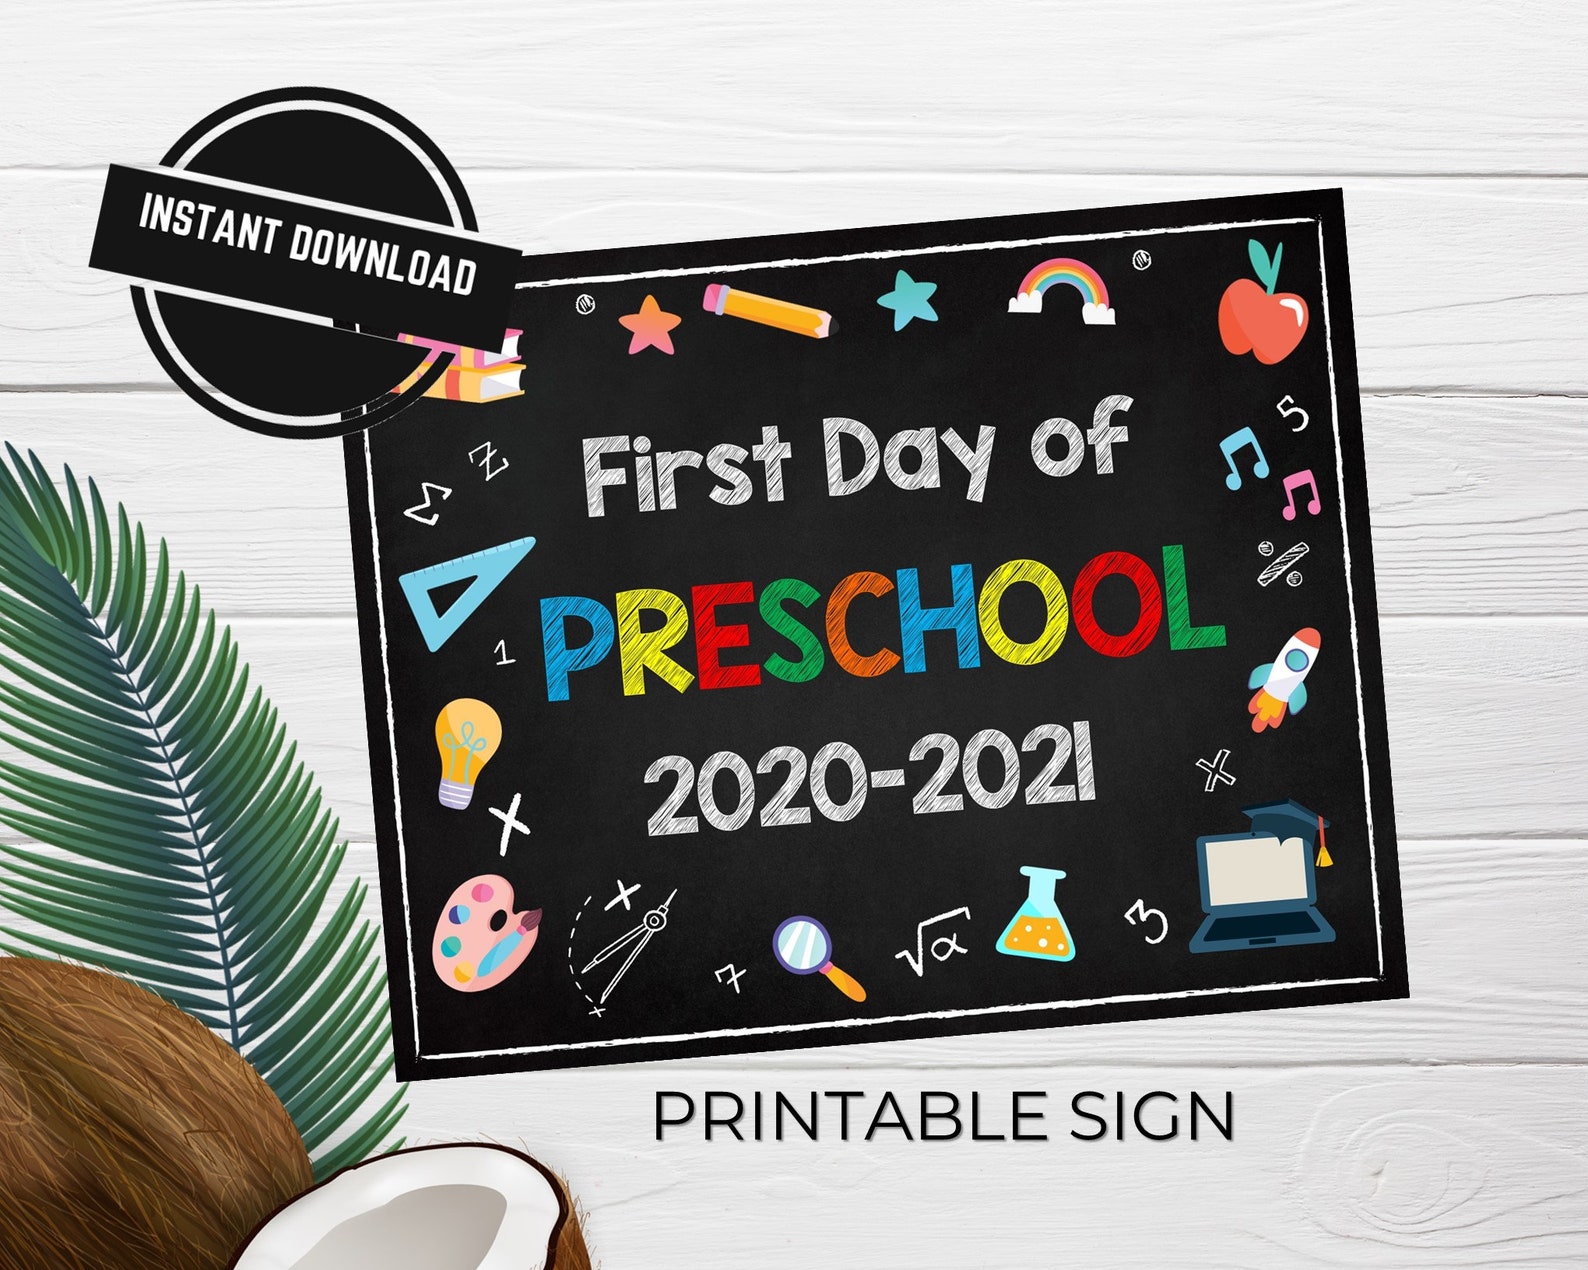 first-day-of-preschool-2020-2021-printable-sign-poster-etsy